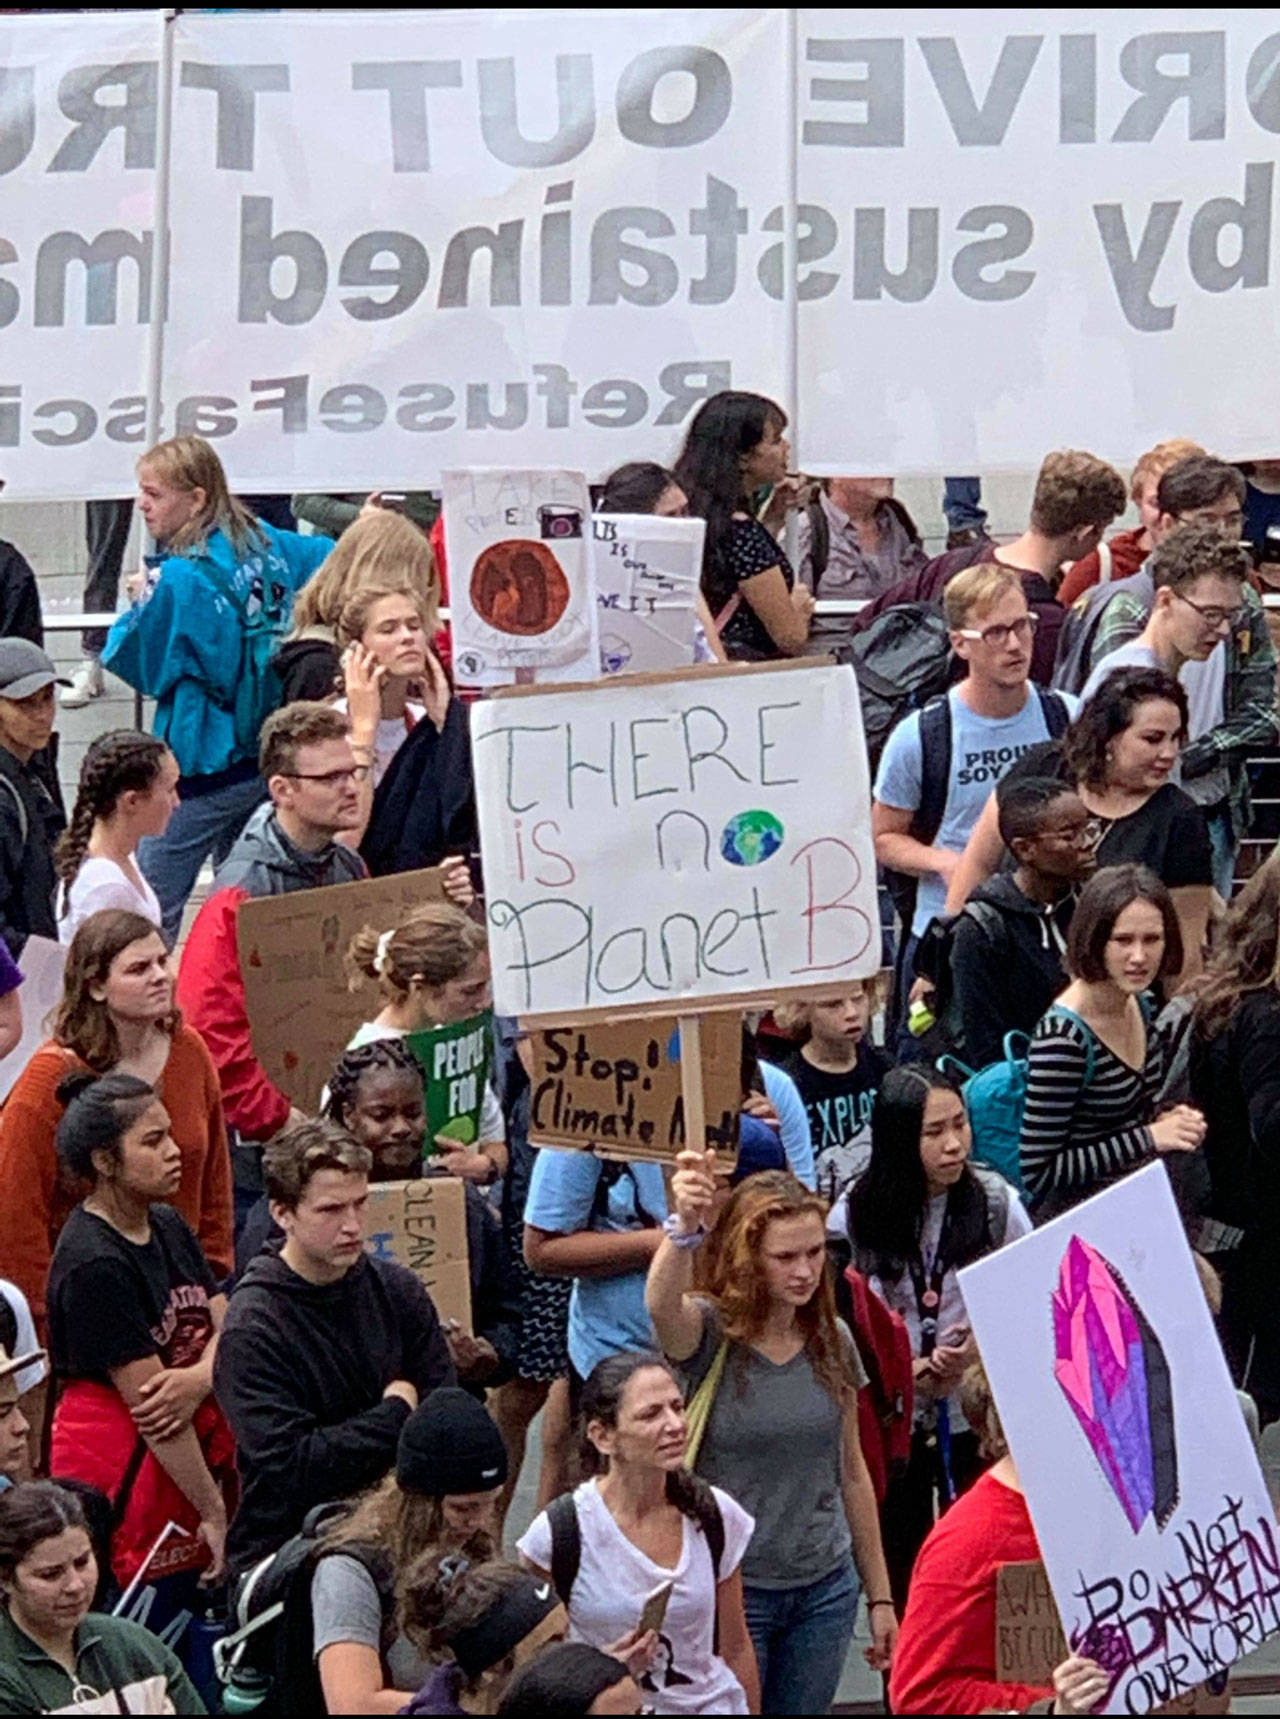 Students from Kingston High School joined the global climate strike at Seattle’s Cal Anderson Park on Friday. (Photo courtesy Madrona Eickmeyer)